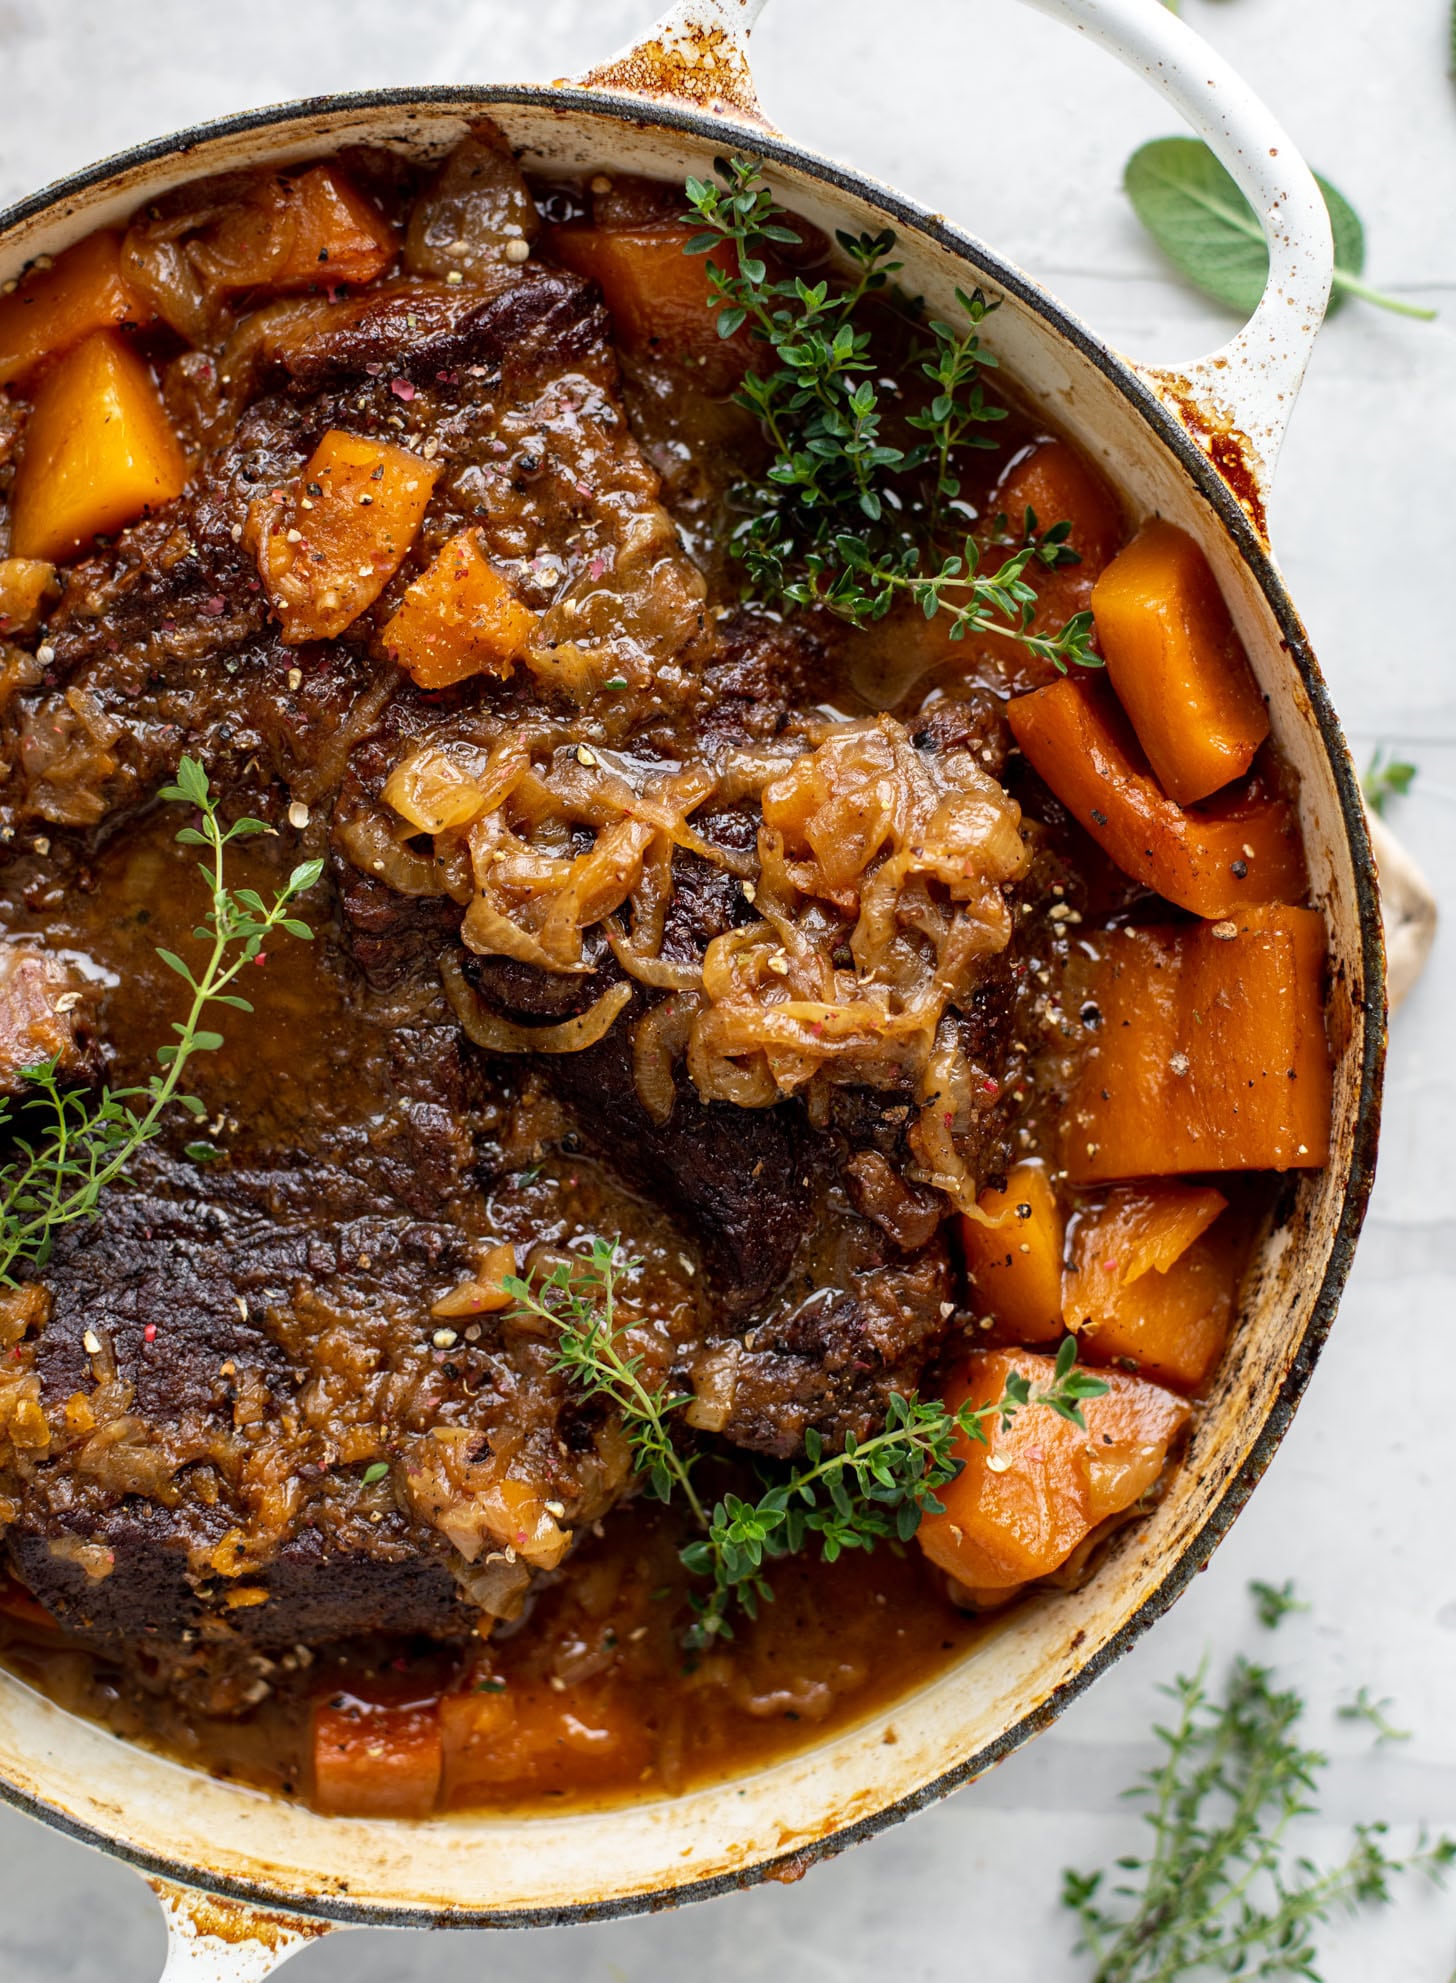 cider braised pot roast with caramelized onions and butternut squash